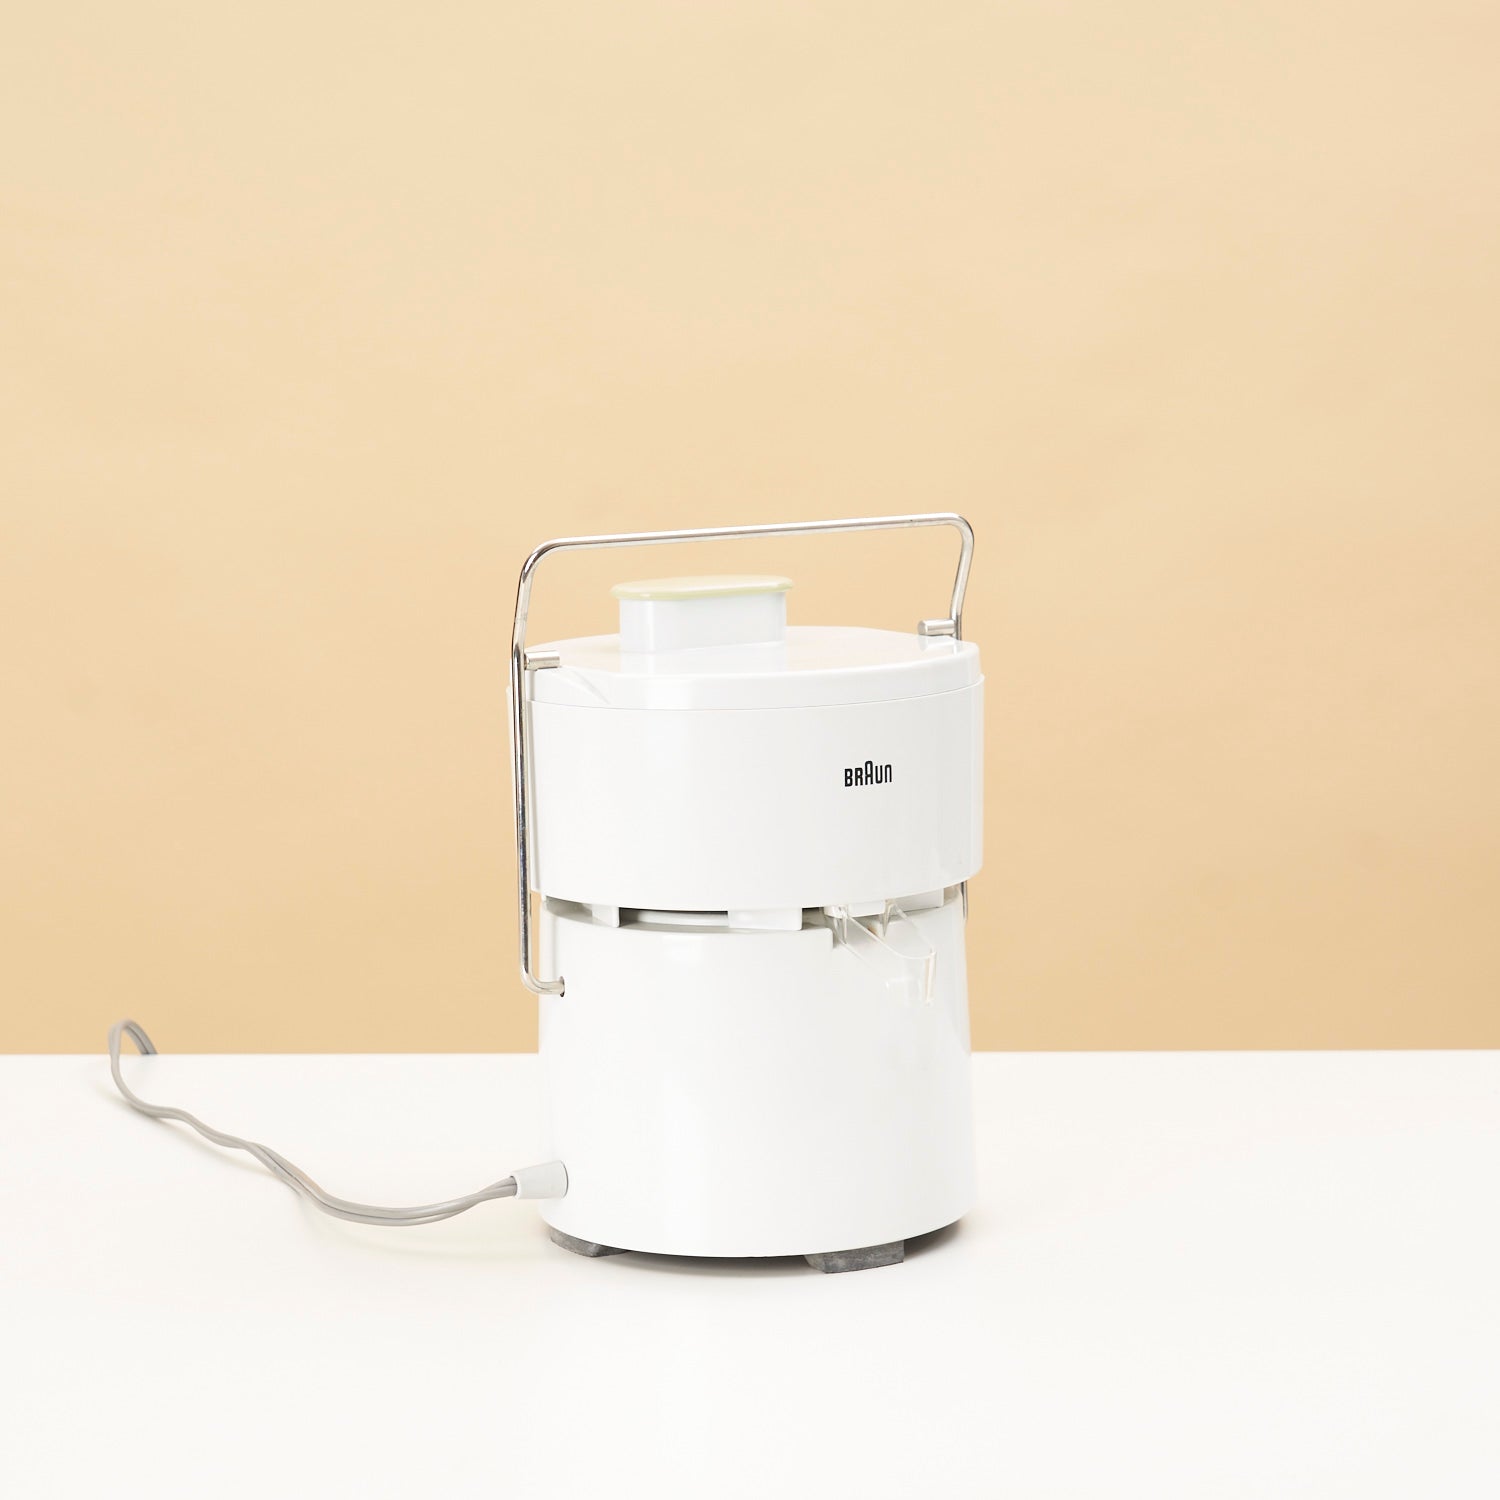 'MP 32' Electric Juicer by Braun